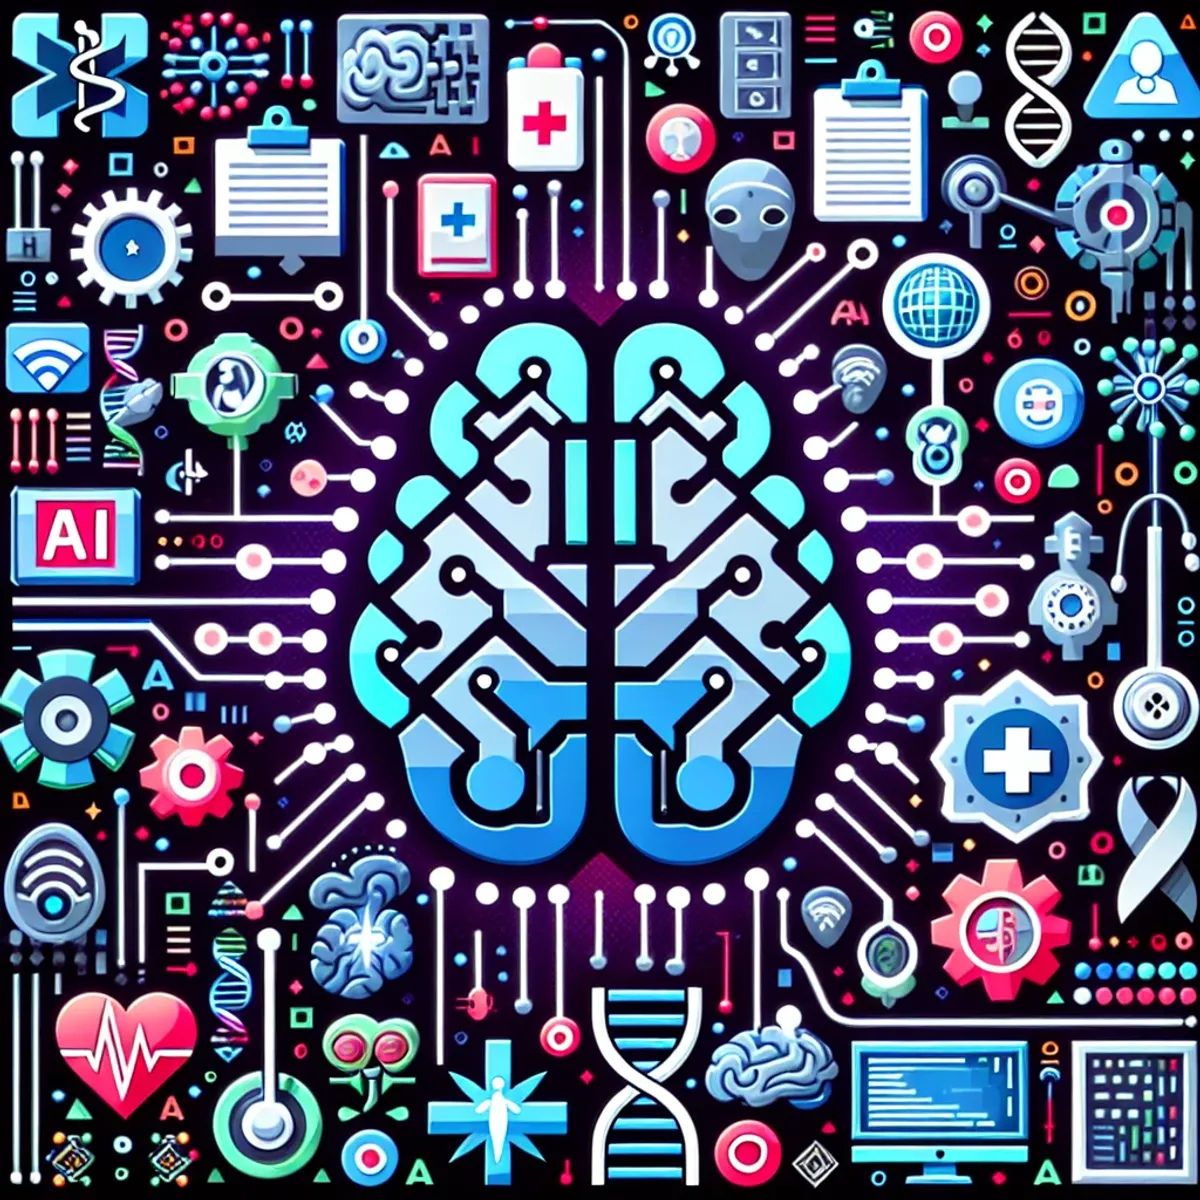 AI-powered medical coding automation: A blend of circuit boards, artificial brains, staff of Asclepius, stethoscope, and DNA helix symbolizing the fusion of AI and medical elements in the automation process.